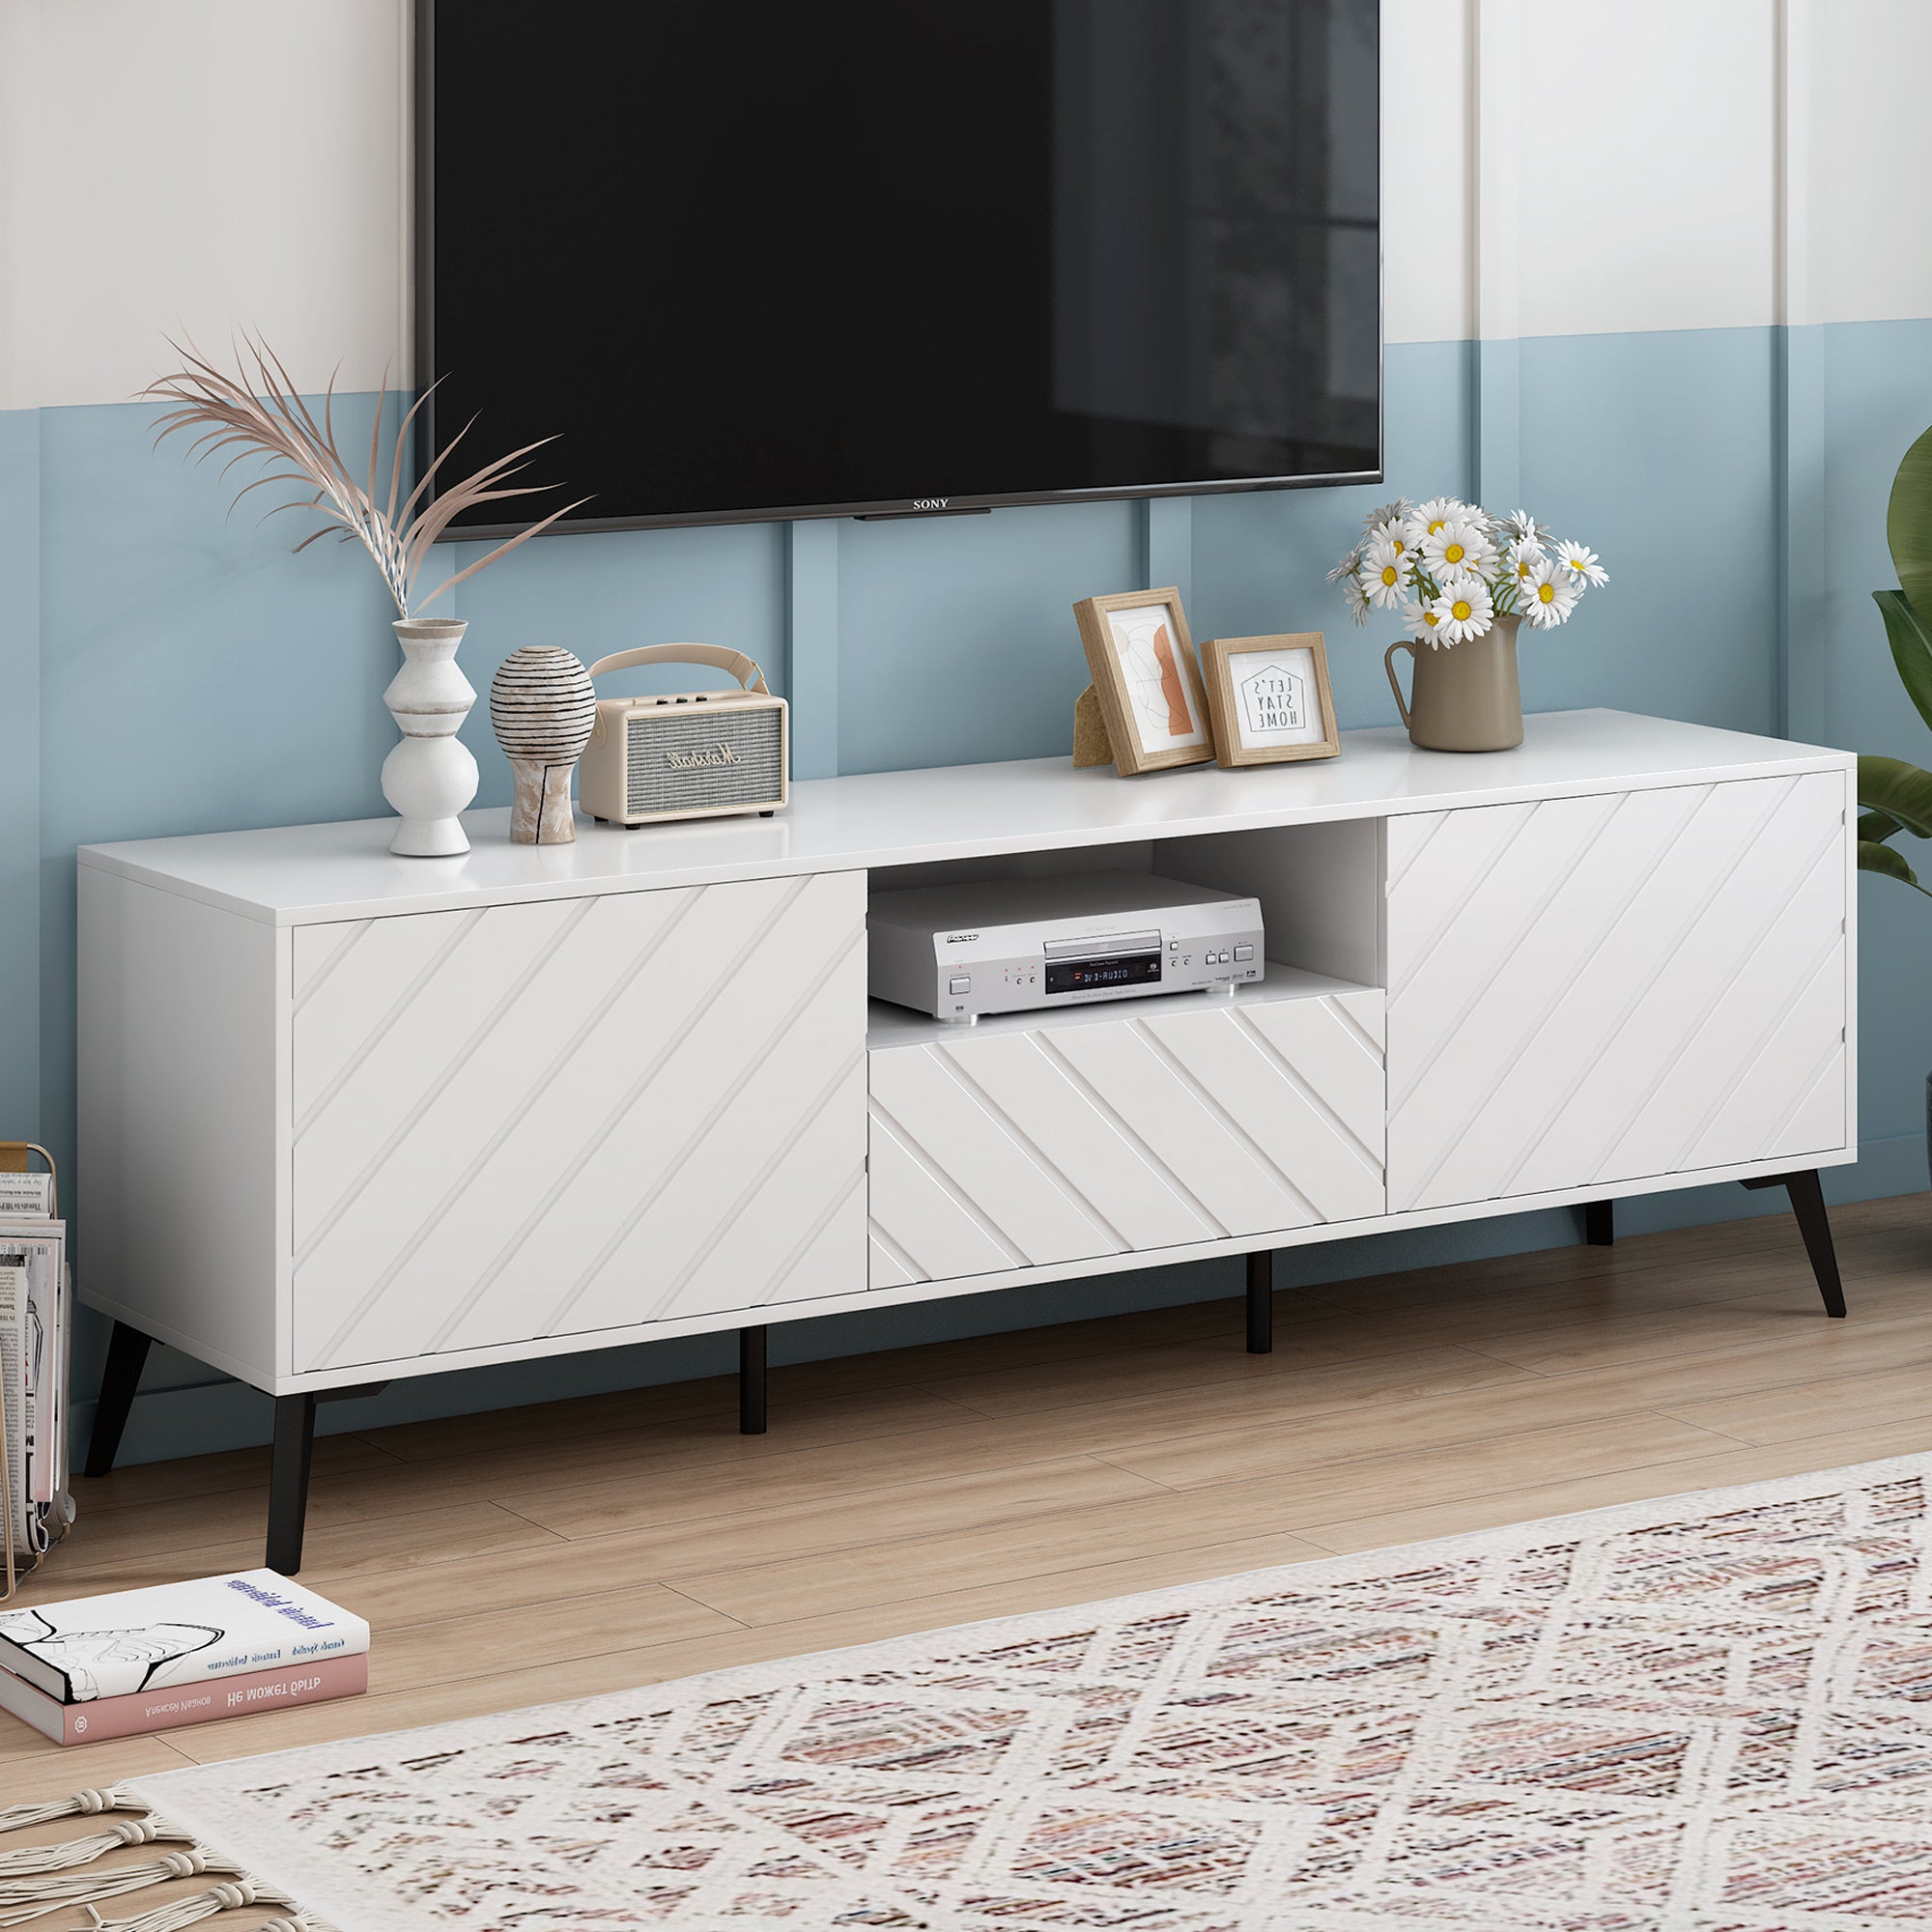 66.90" White Modern TV Stand with Storage Fits TV up to 75"